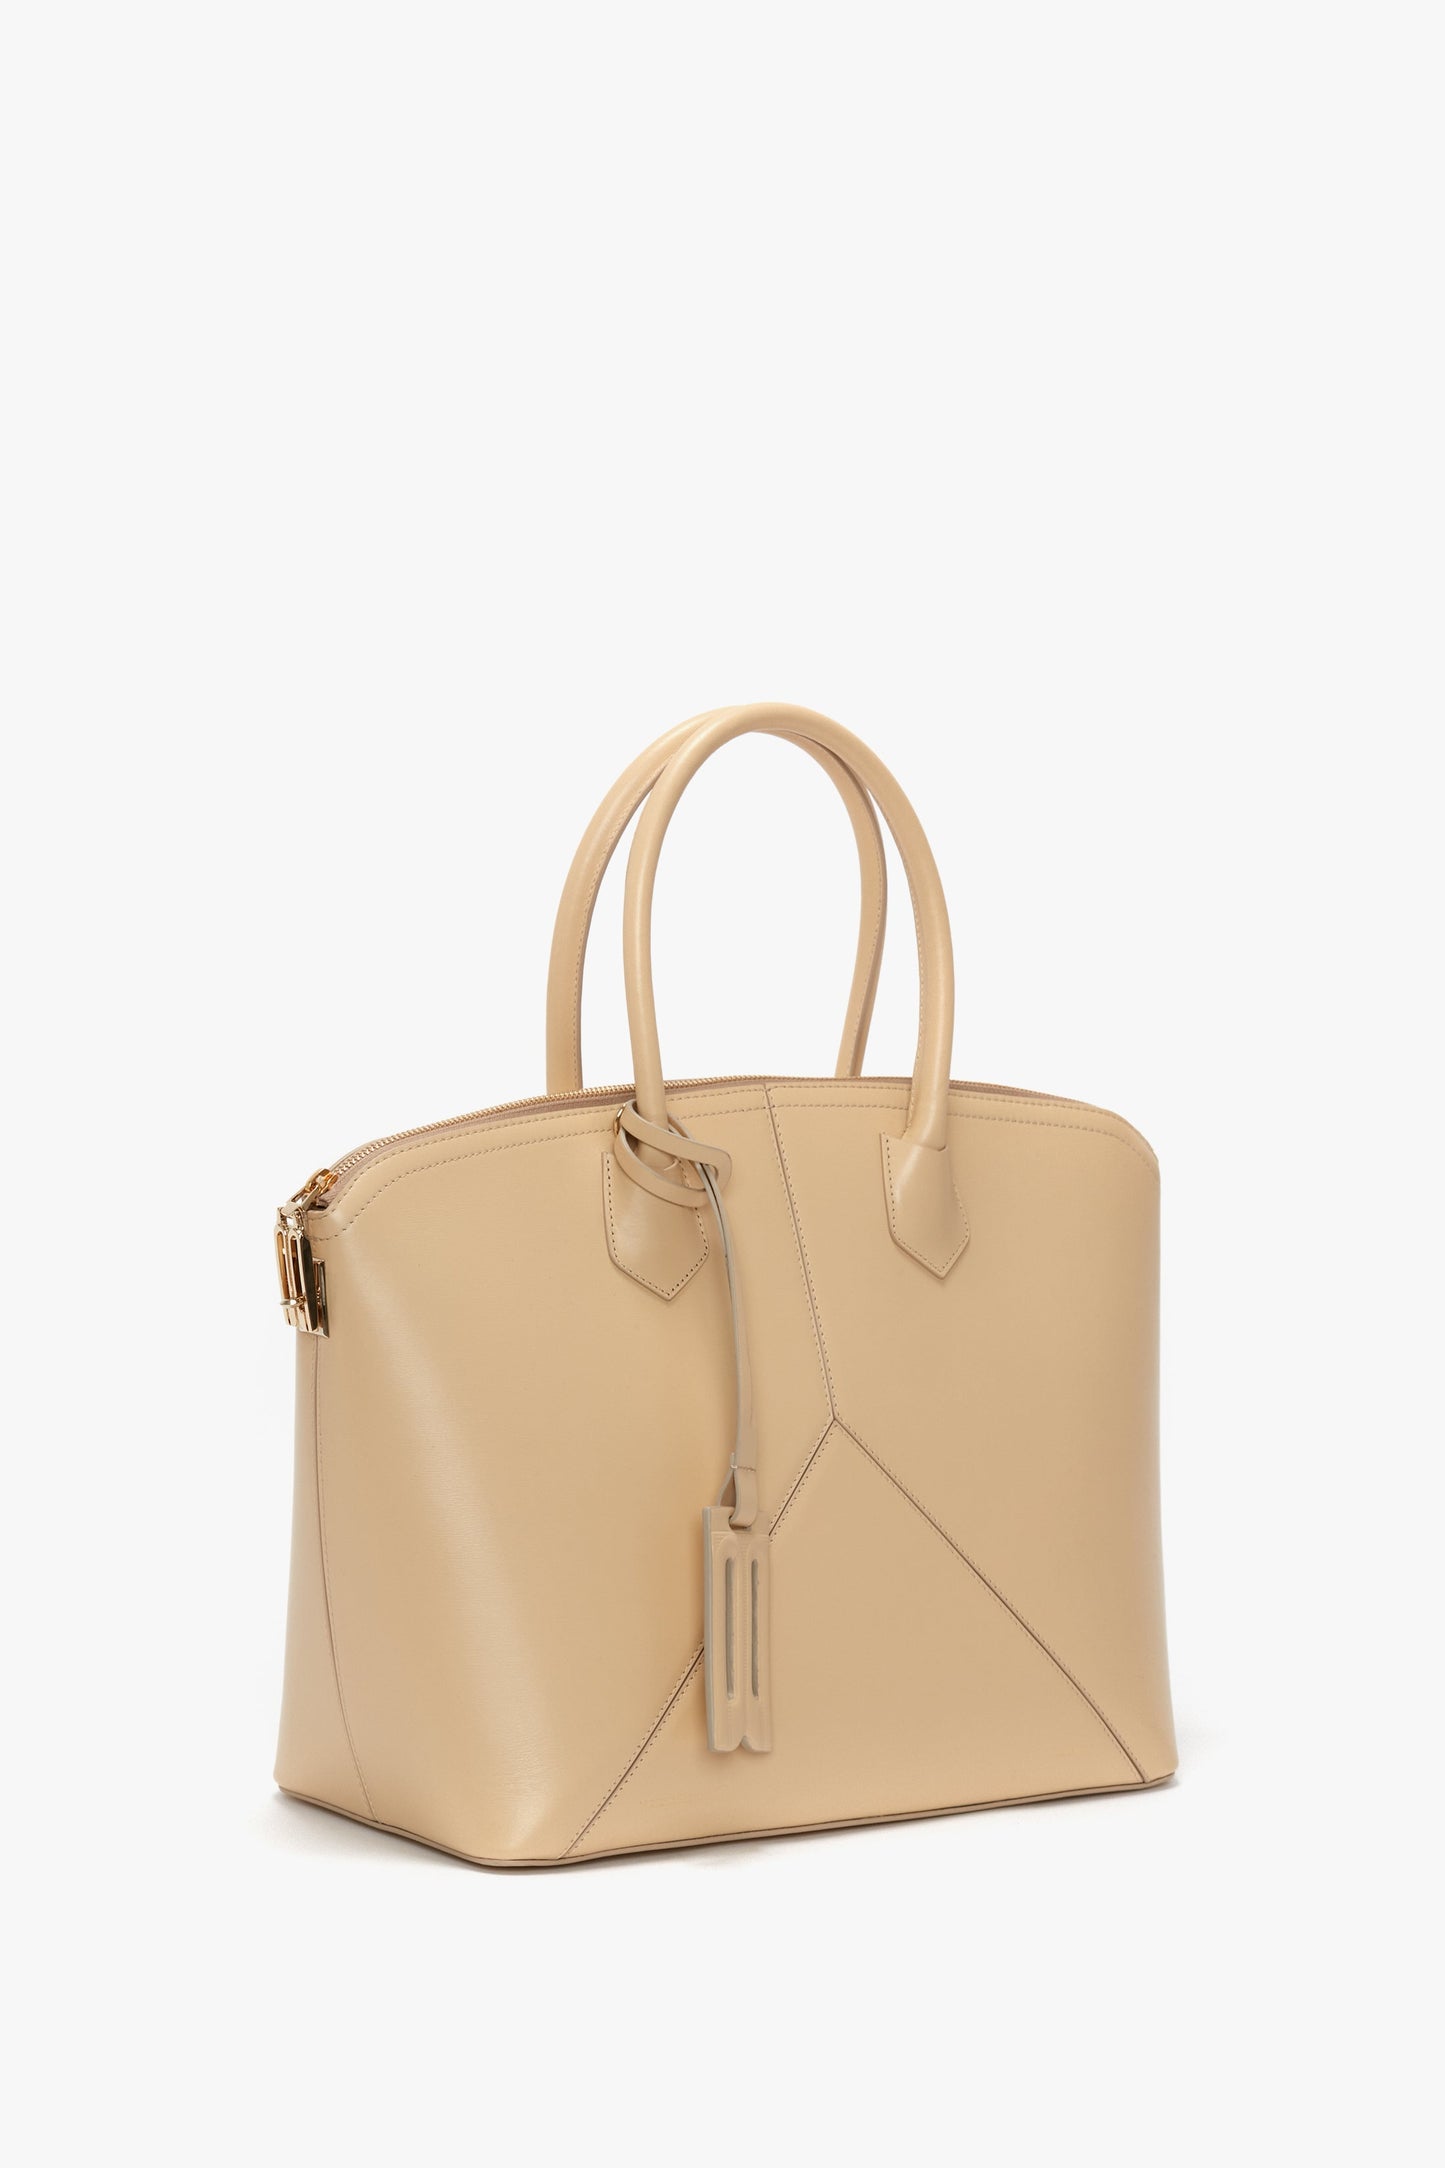 A beige Victoria Beckham Victoria Bag In Sesame Leather with a geometrical design, top handles, leather panels, a zipper closure, and a luggage tag attached.